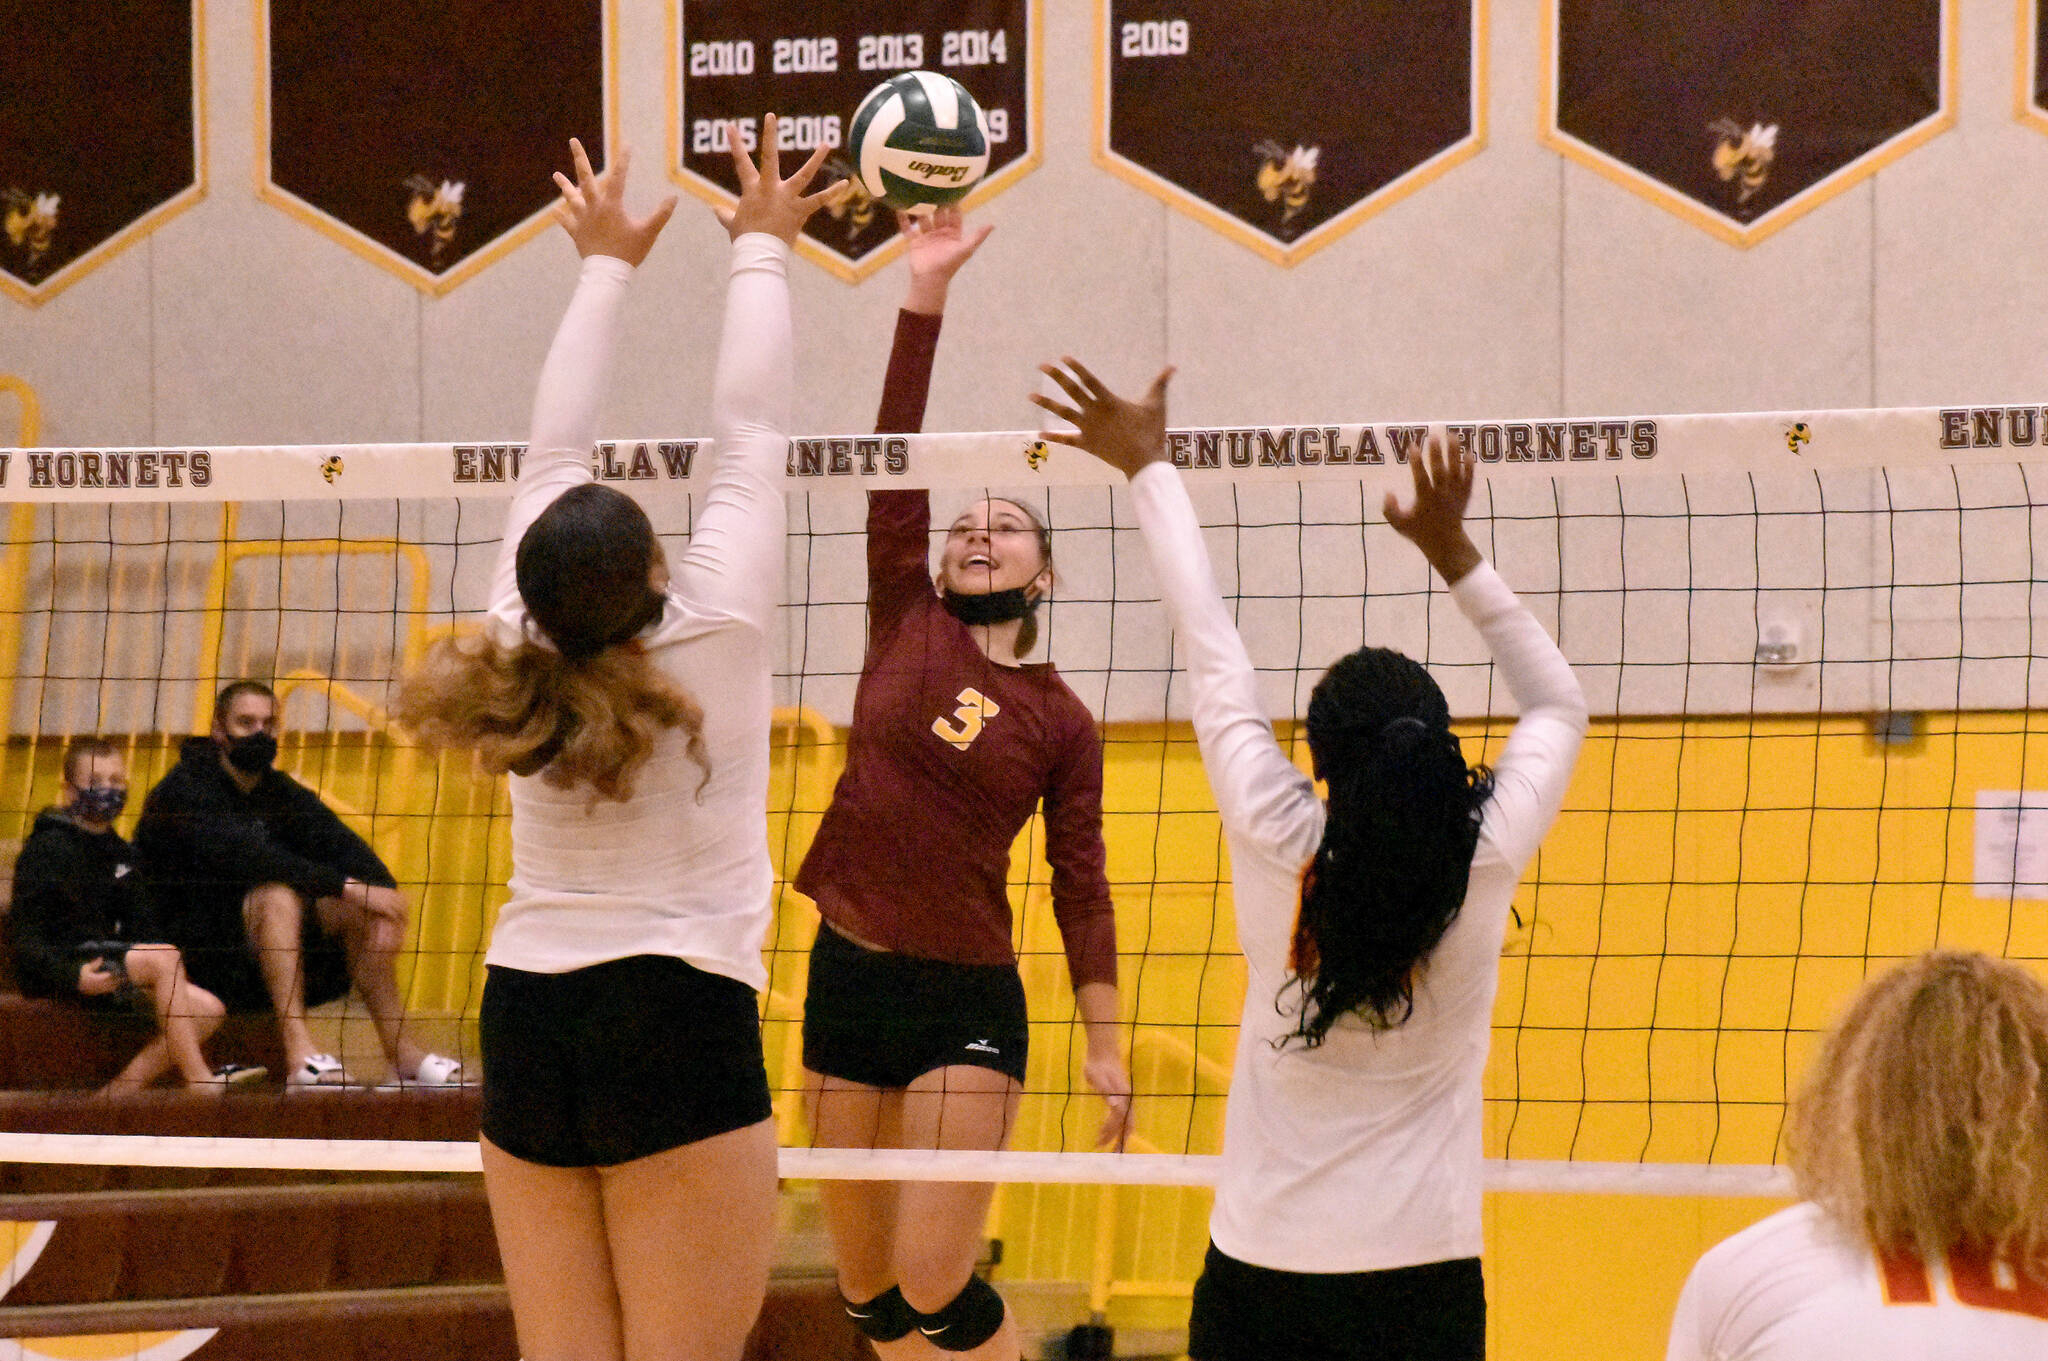 Samantha Darby (#3) goes high for a kill. Photo by Kevin Hanson.